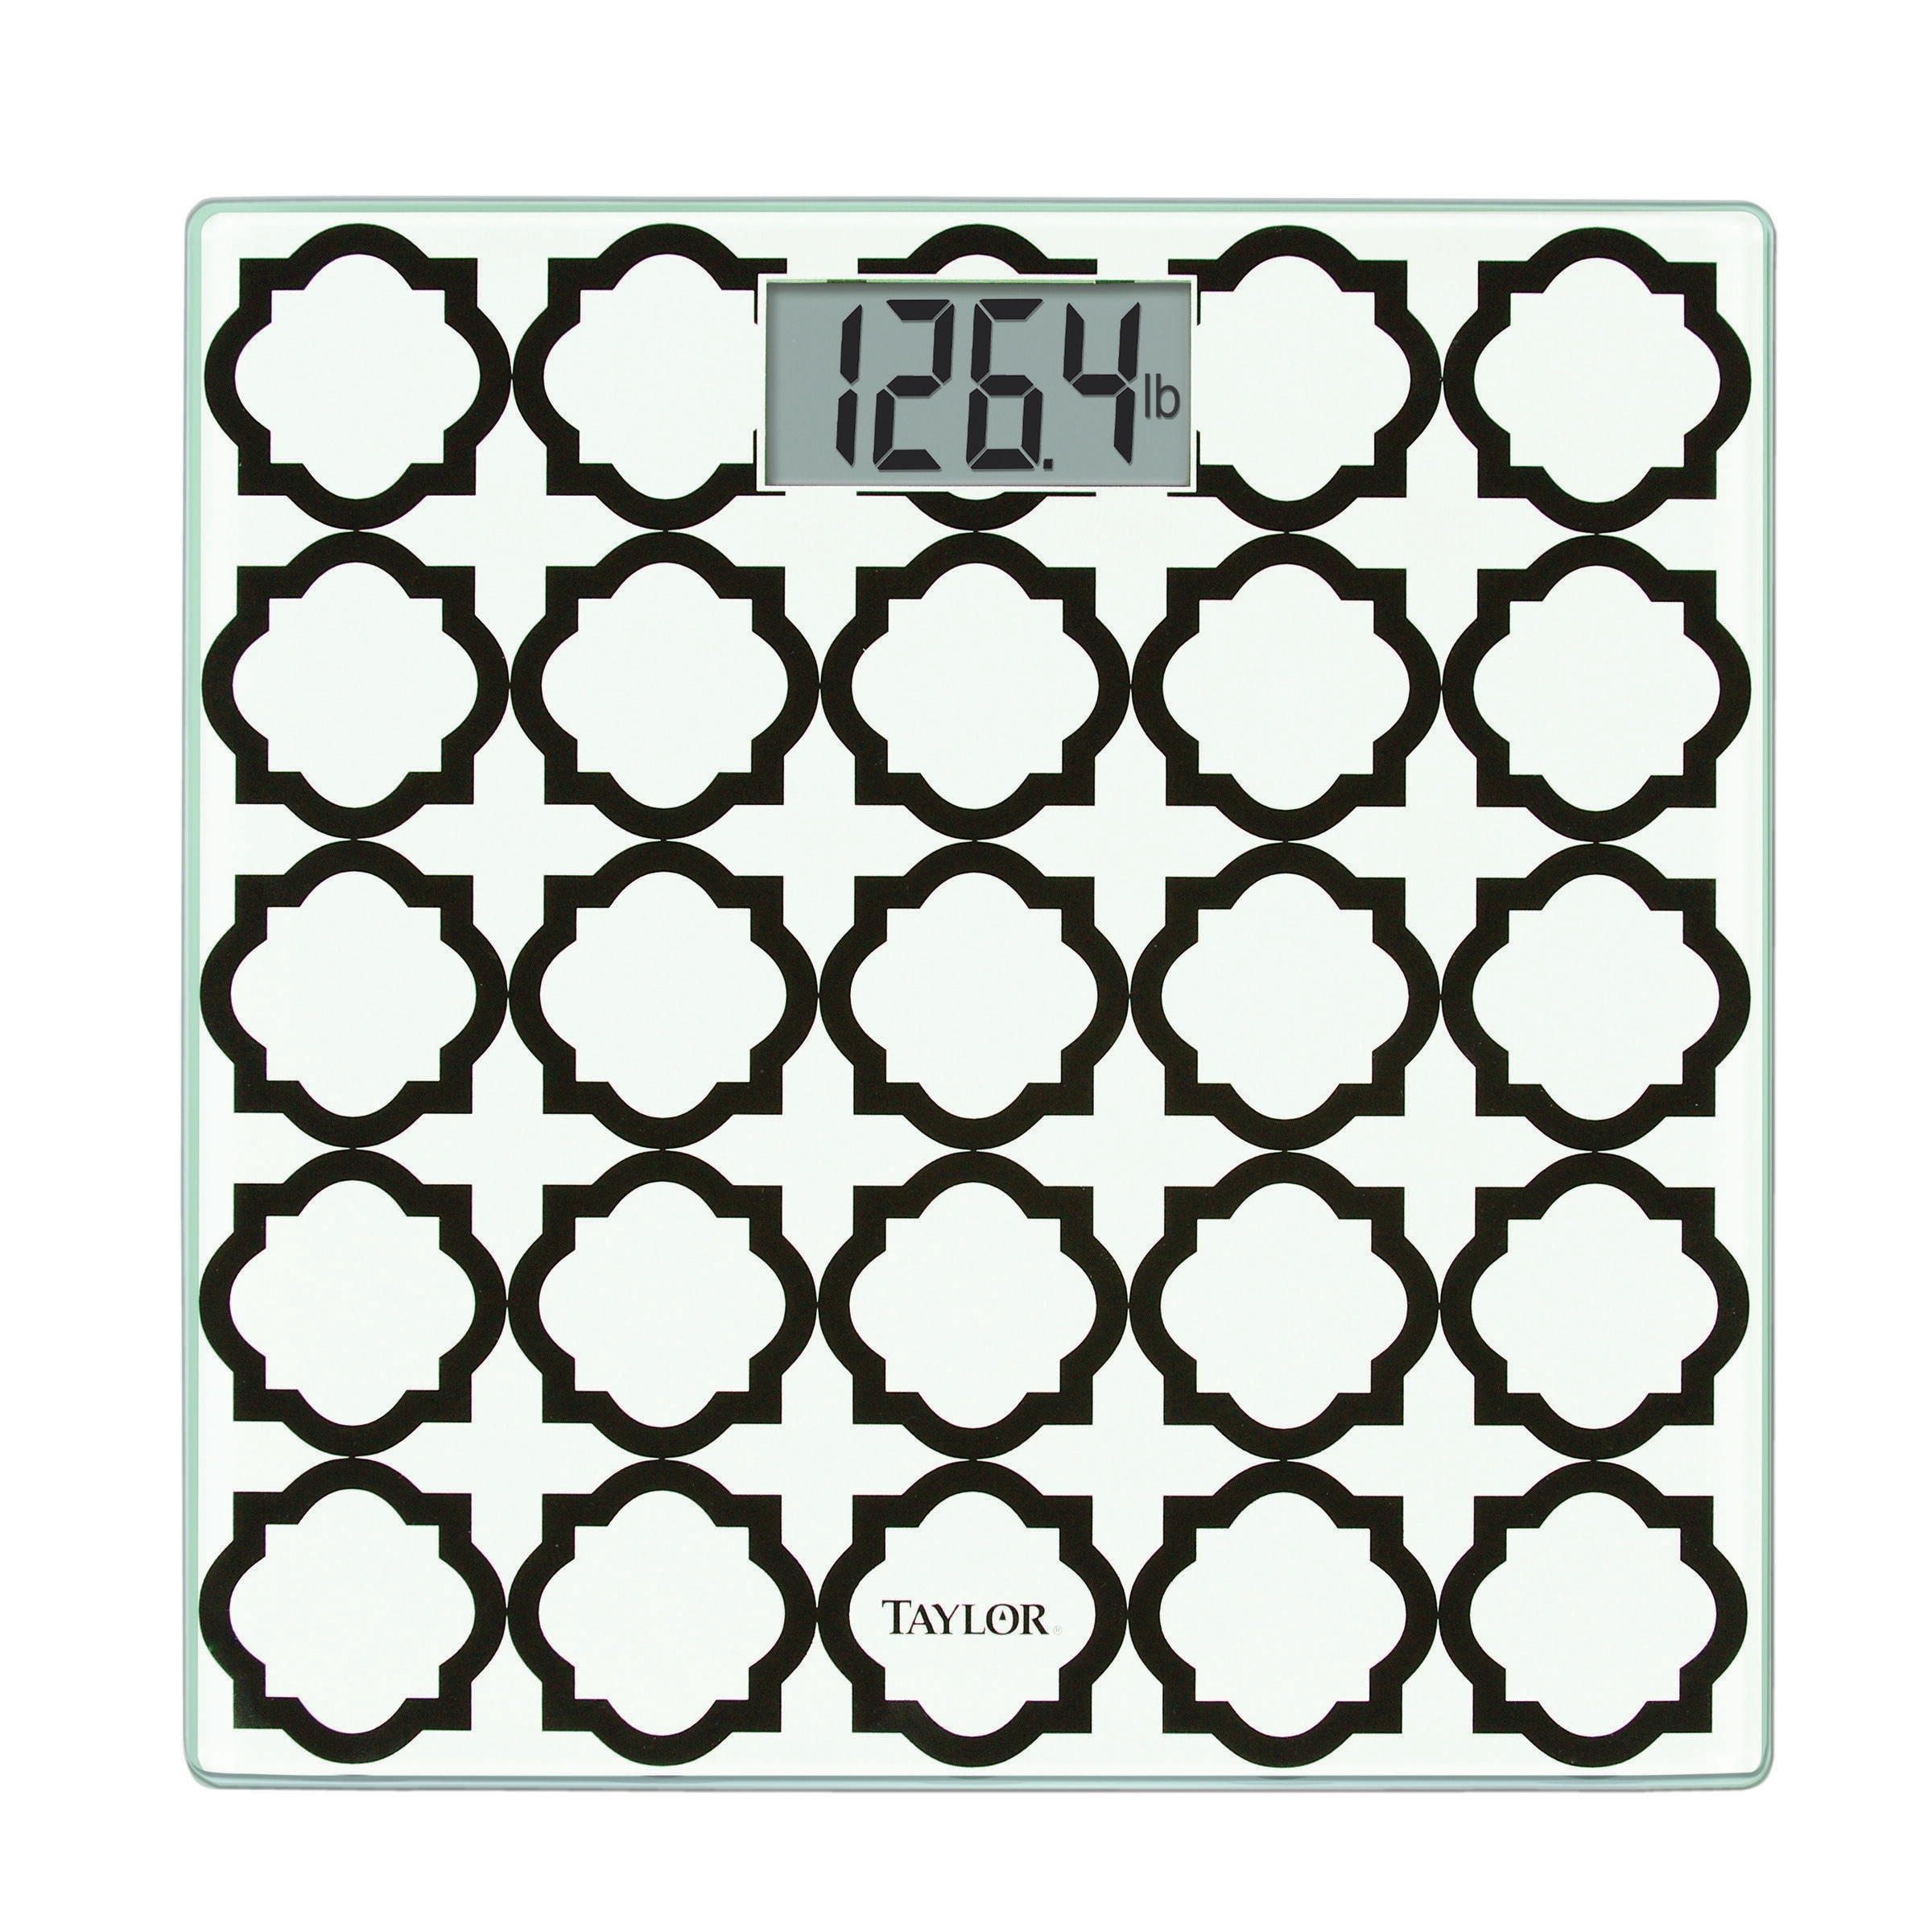 https://ak1.ostkcdn.com/images/products/is/images/direct/441ded636530d84611c05238cda99c1d5b8b60d3/Taylor-Digital-Bath-Scale-with-Black-and-White-Lattice-Design.jpg